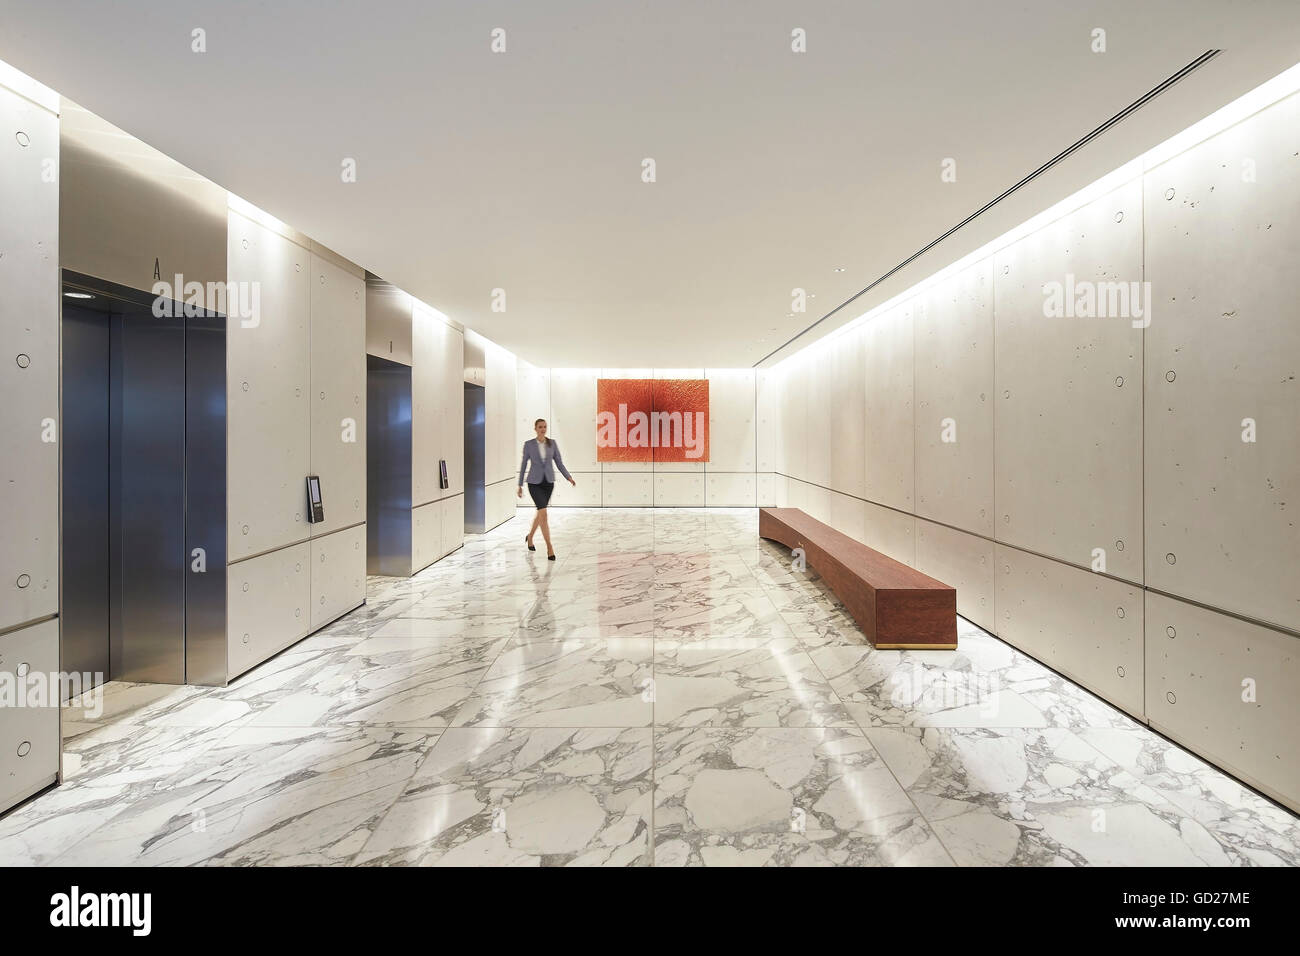 Elevator lobby with white marble flooring. Fitzroy Place, London, United Kingdom. Architect: Sheppard Robson, 2015. Stock Photo